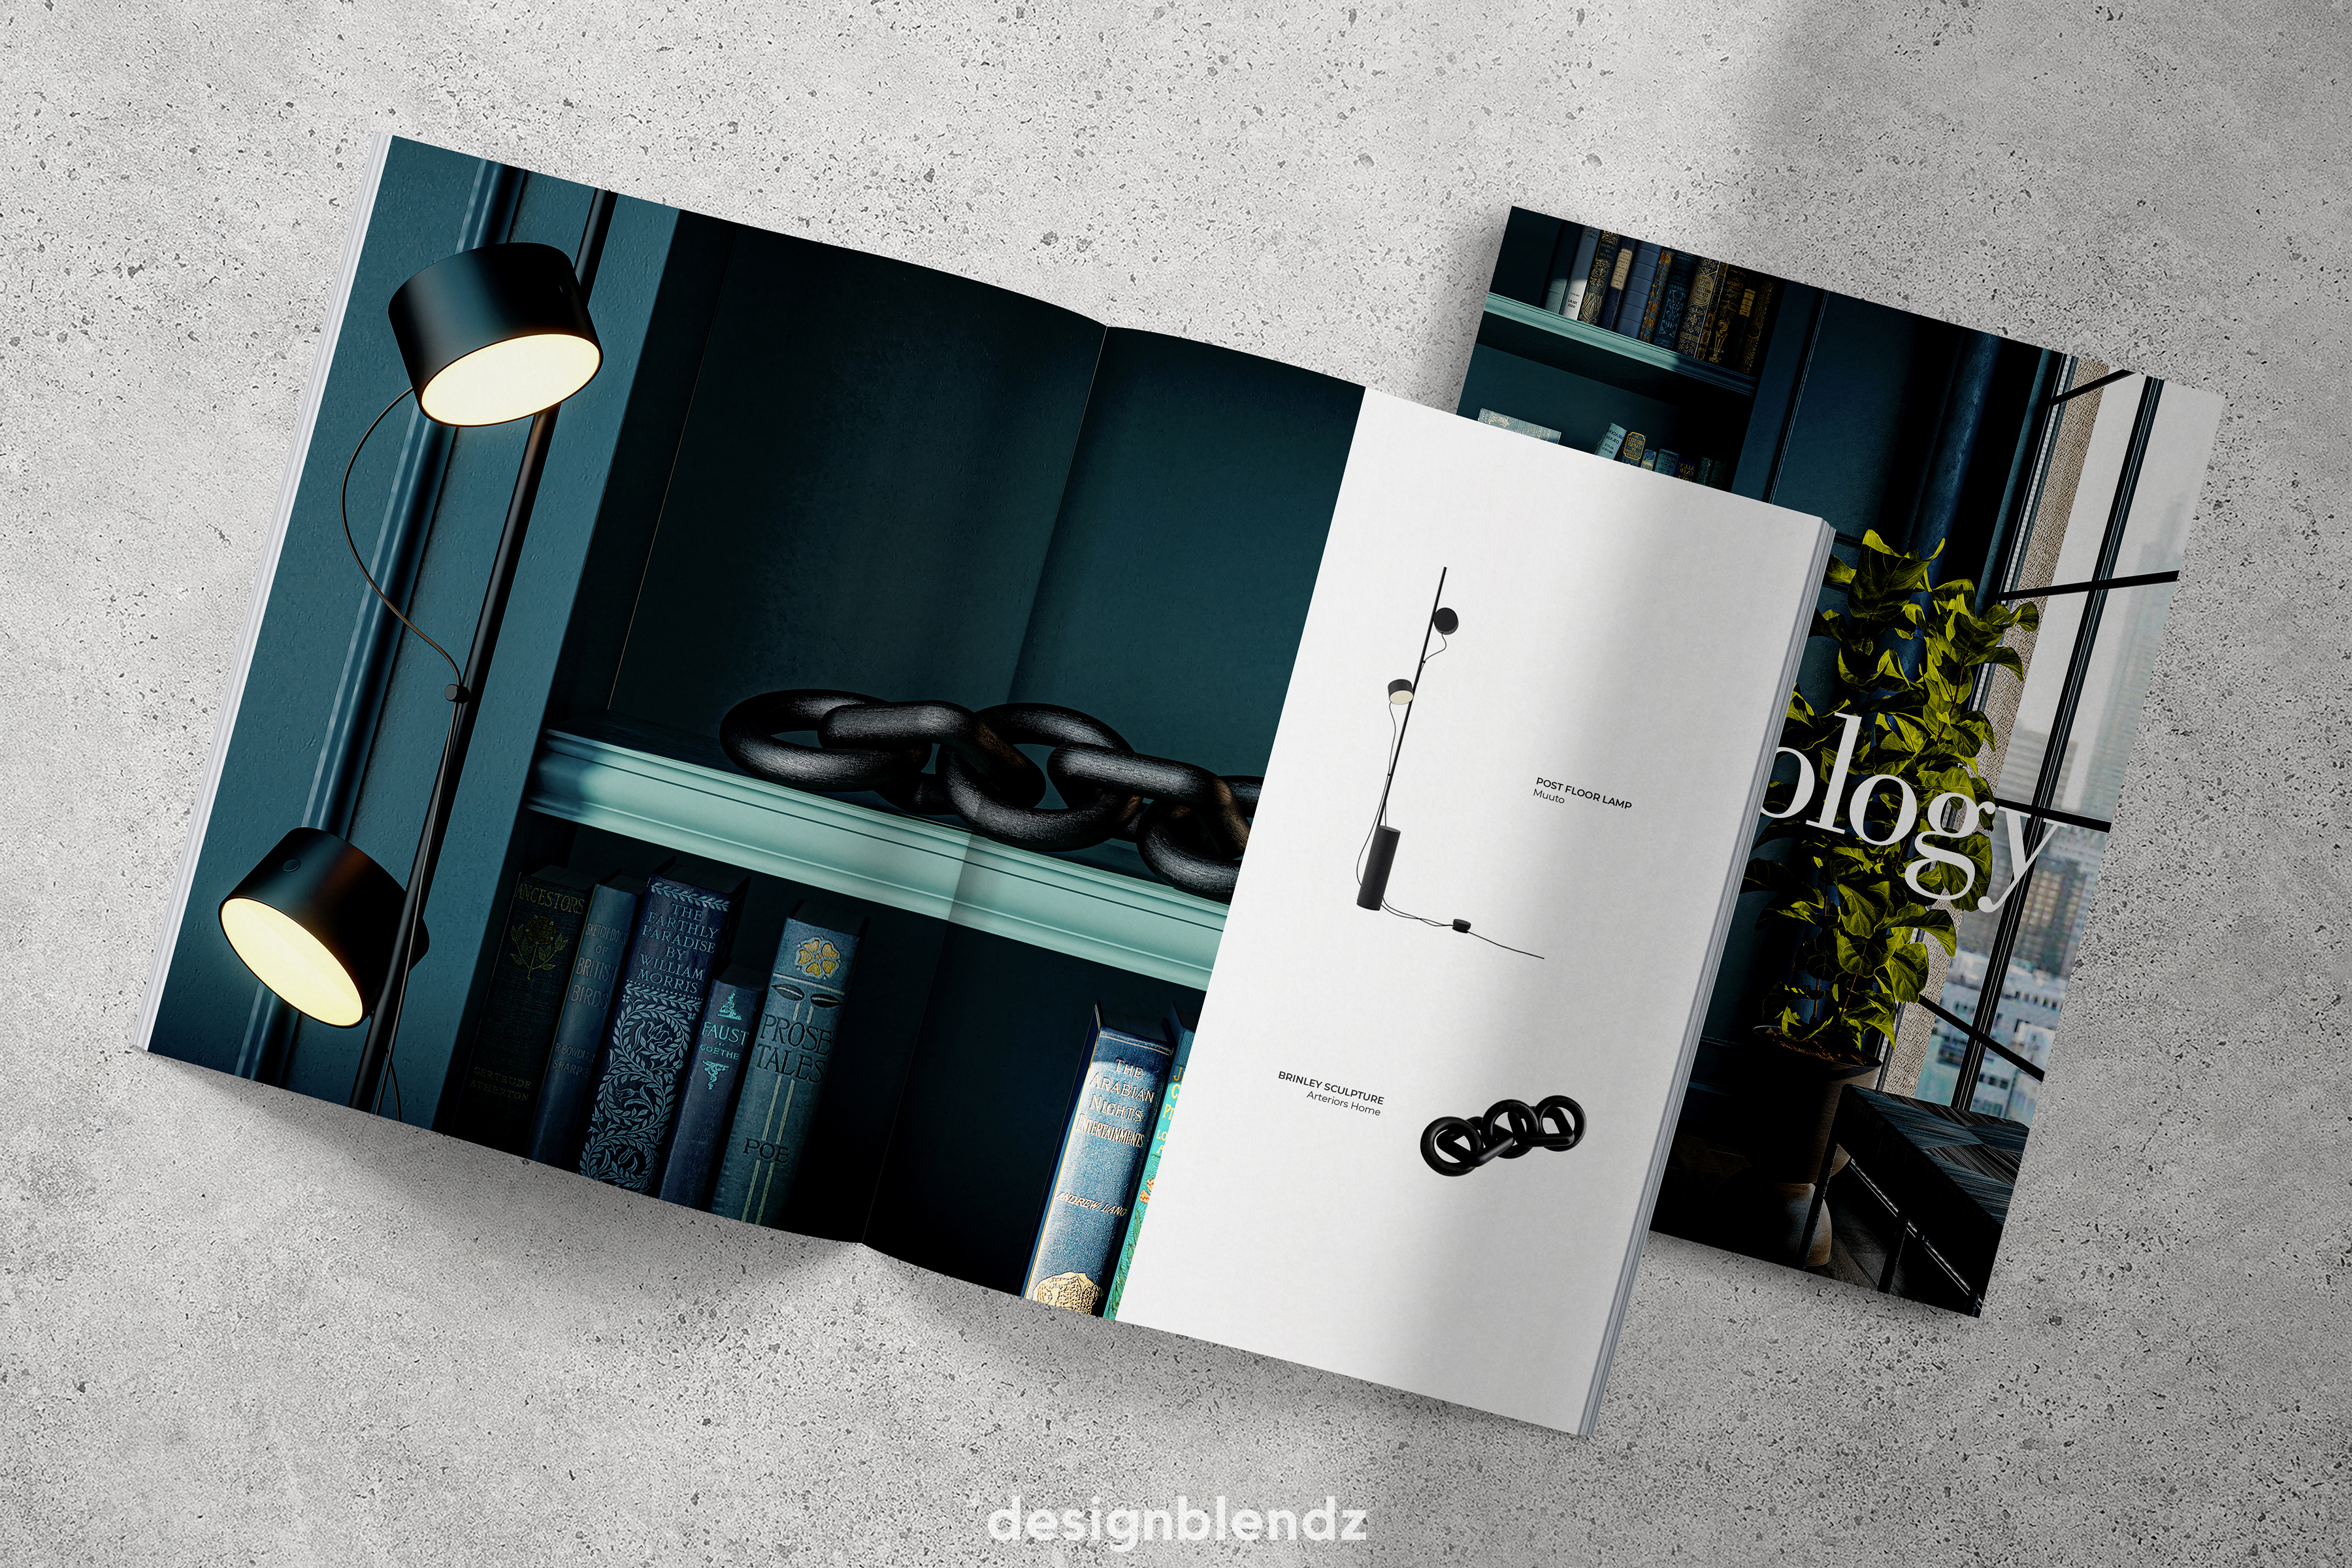 Lightology_Industrial Office_Publication HiRes